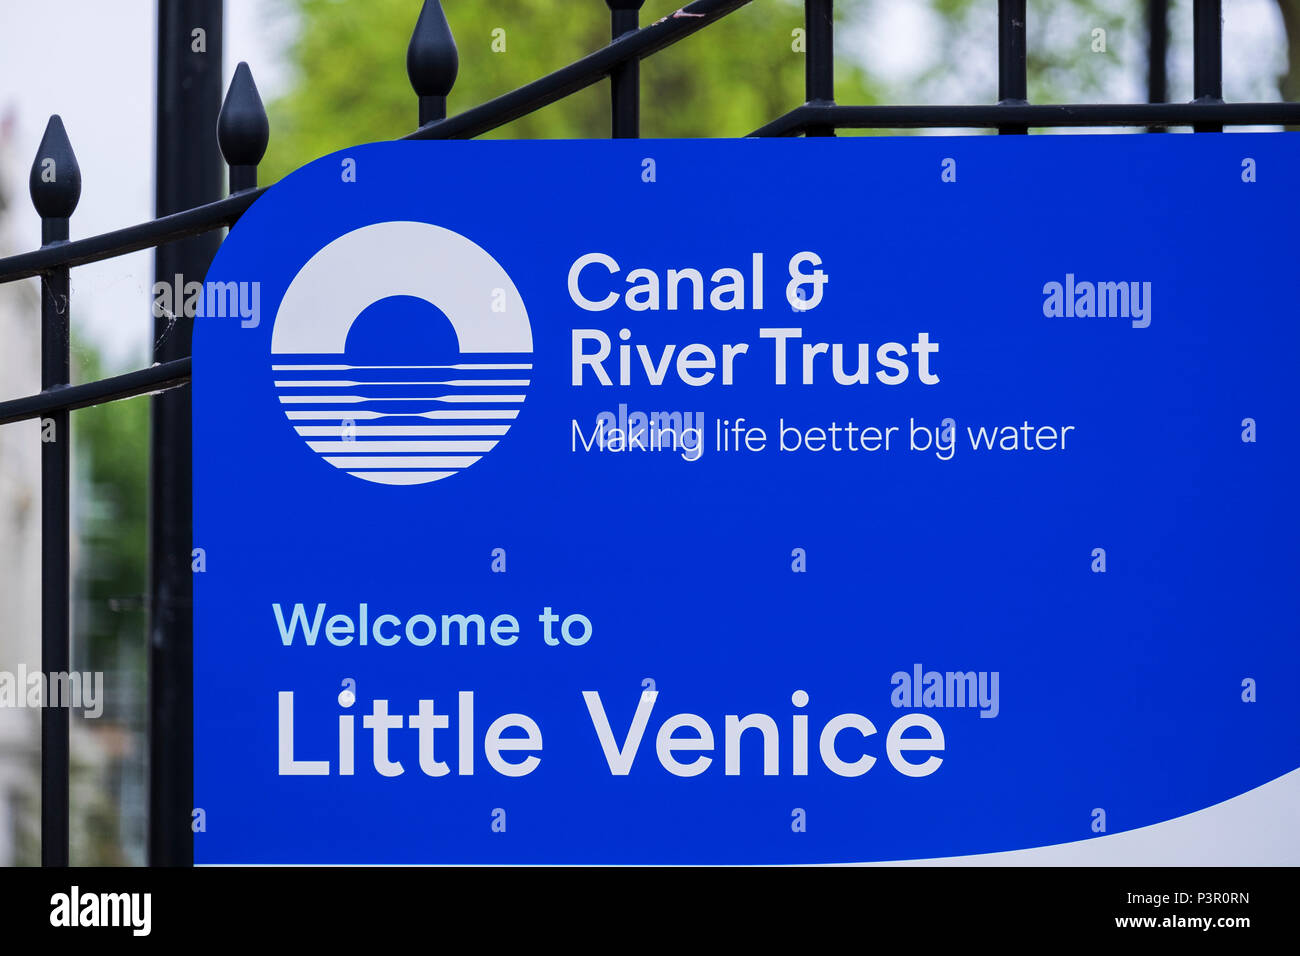 Canal & River Trust sign at Little Venice, London, England, U.K. Stock Photo